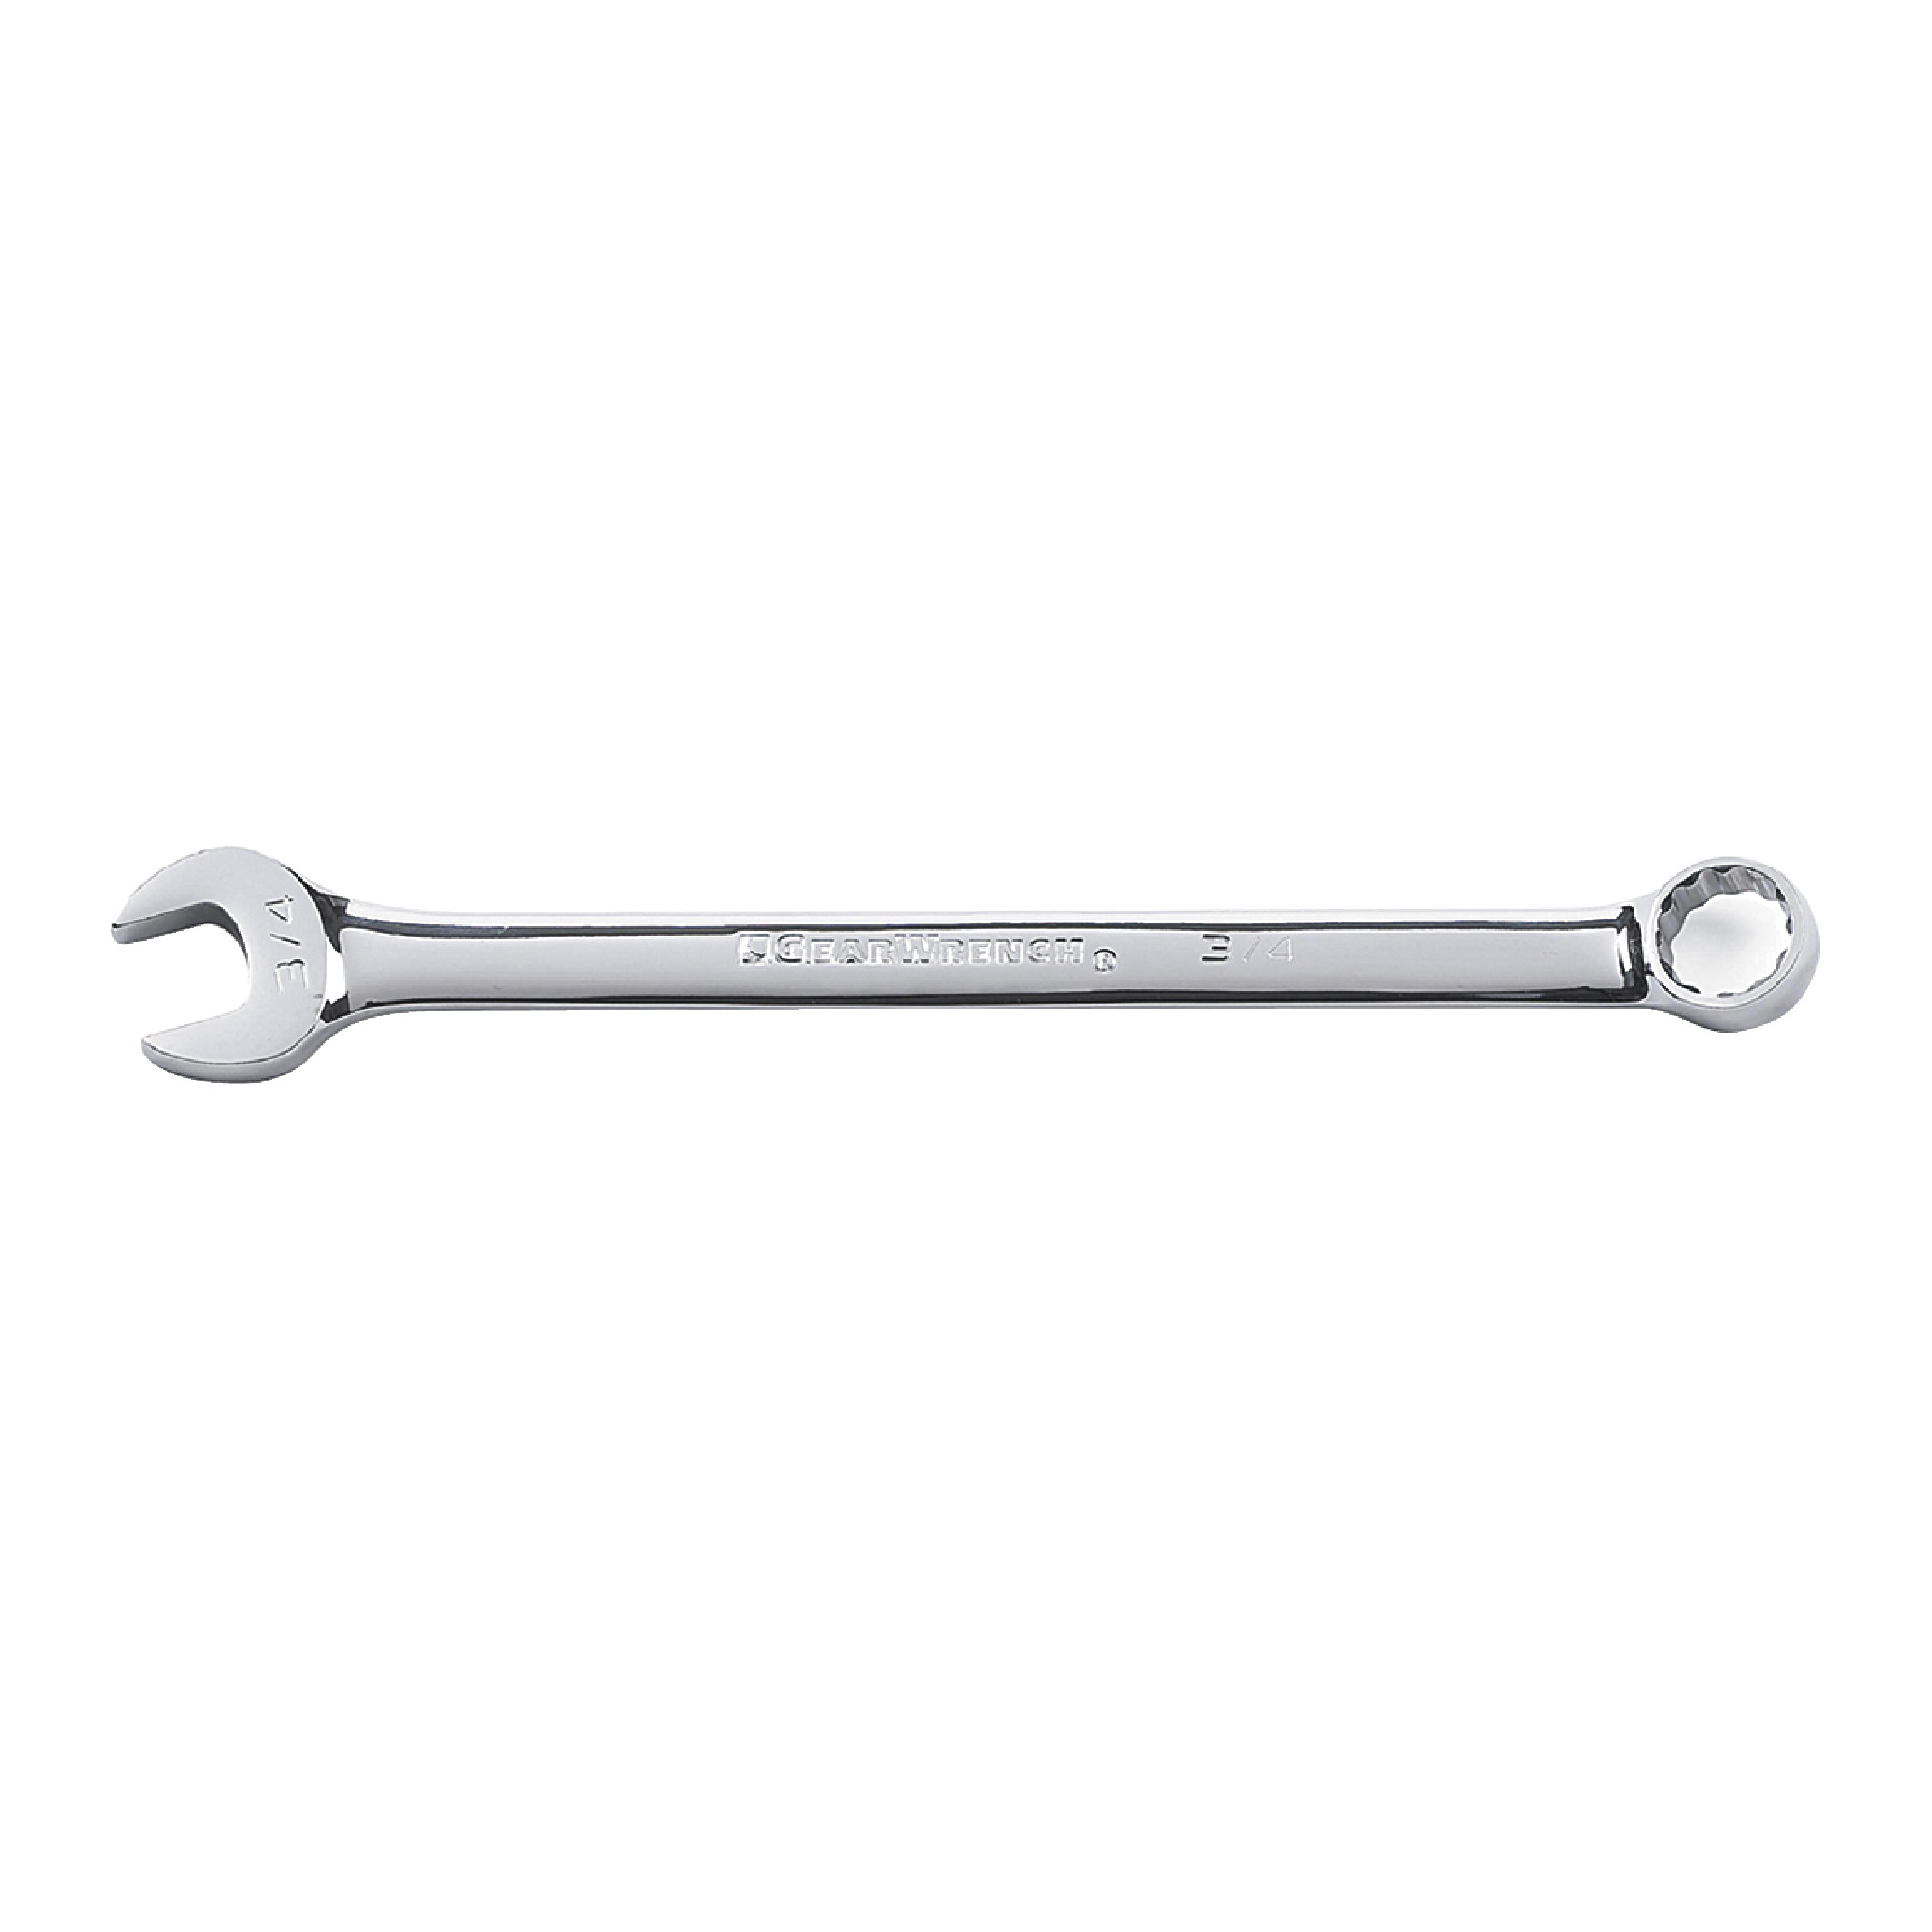 1/2" 12 Point Long Pattern Combination Wrench